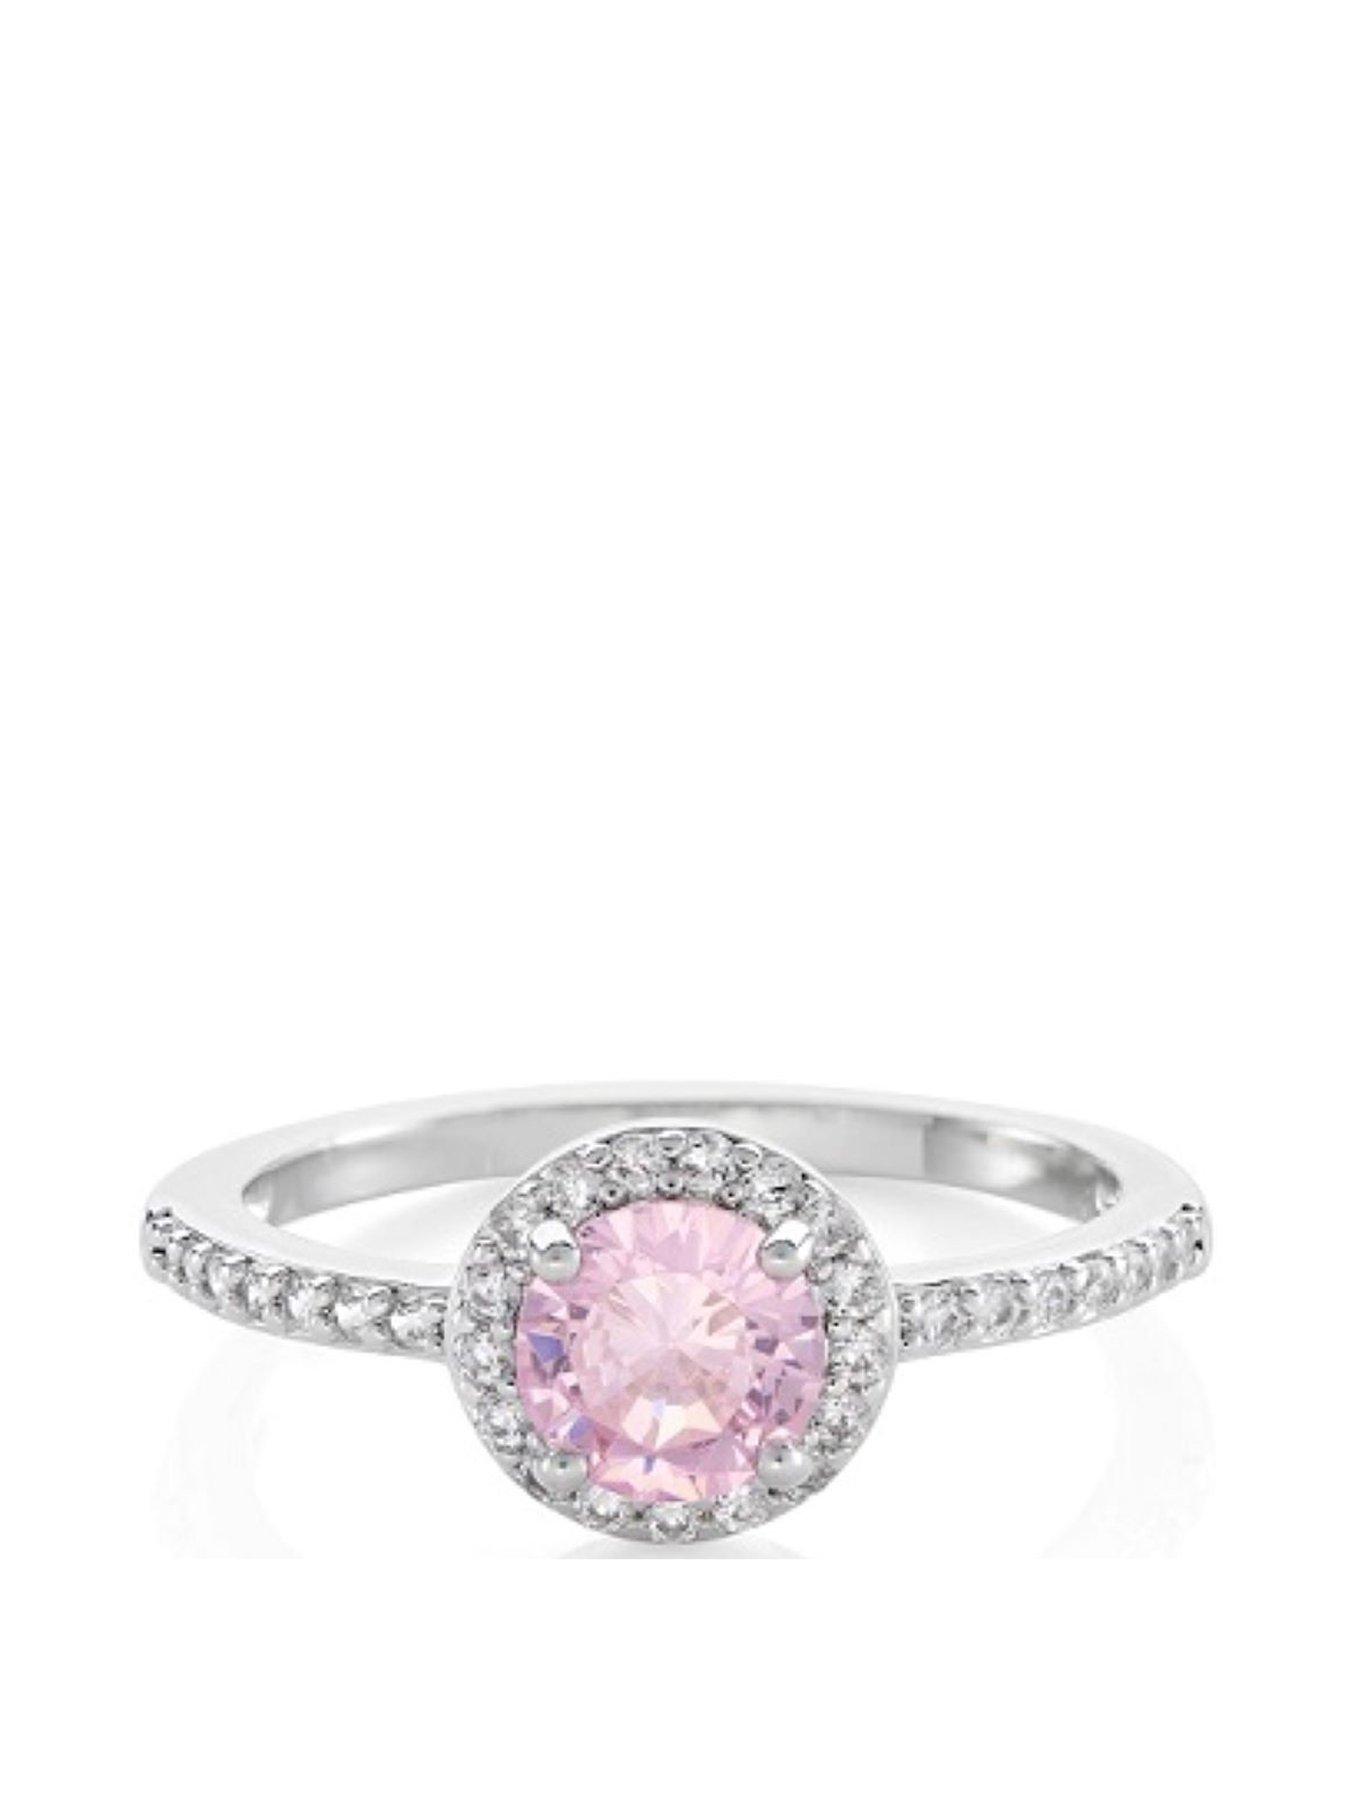 Buckley London The Carat Collection - Pink Halo Ring, Silver, Size M, Women